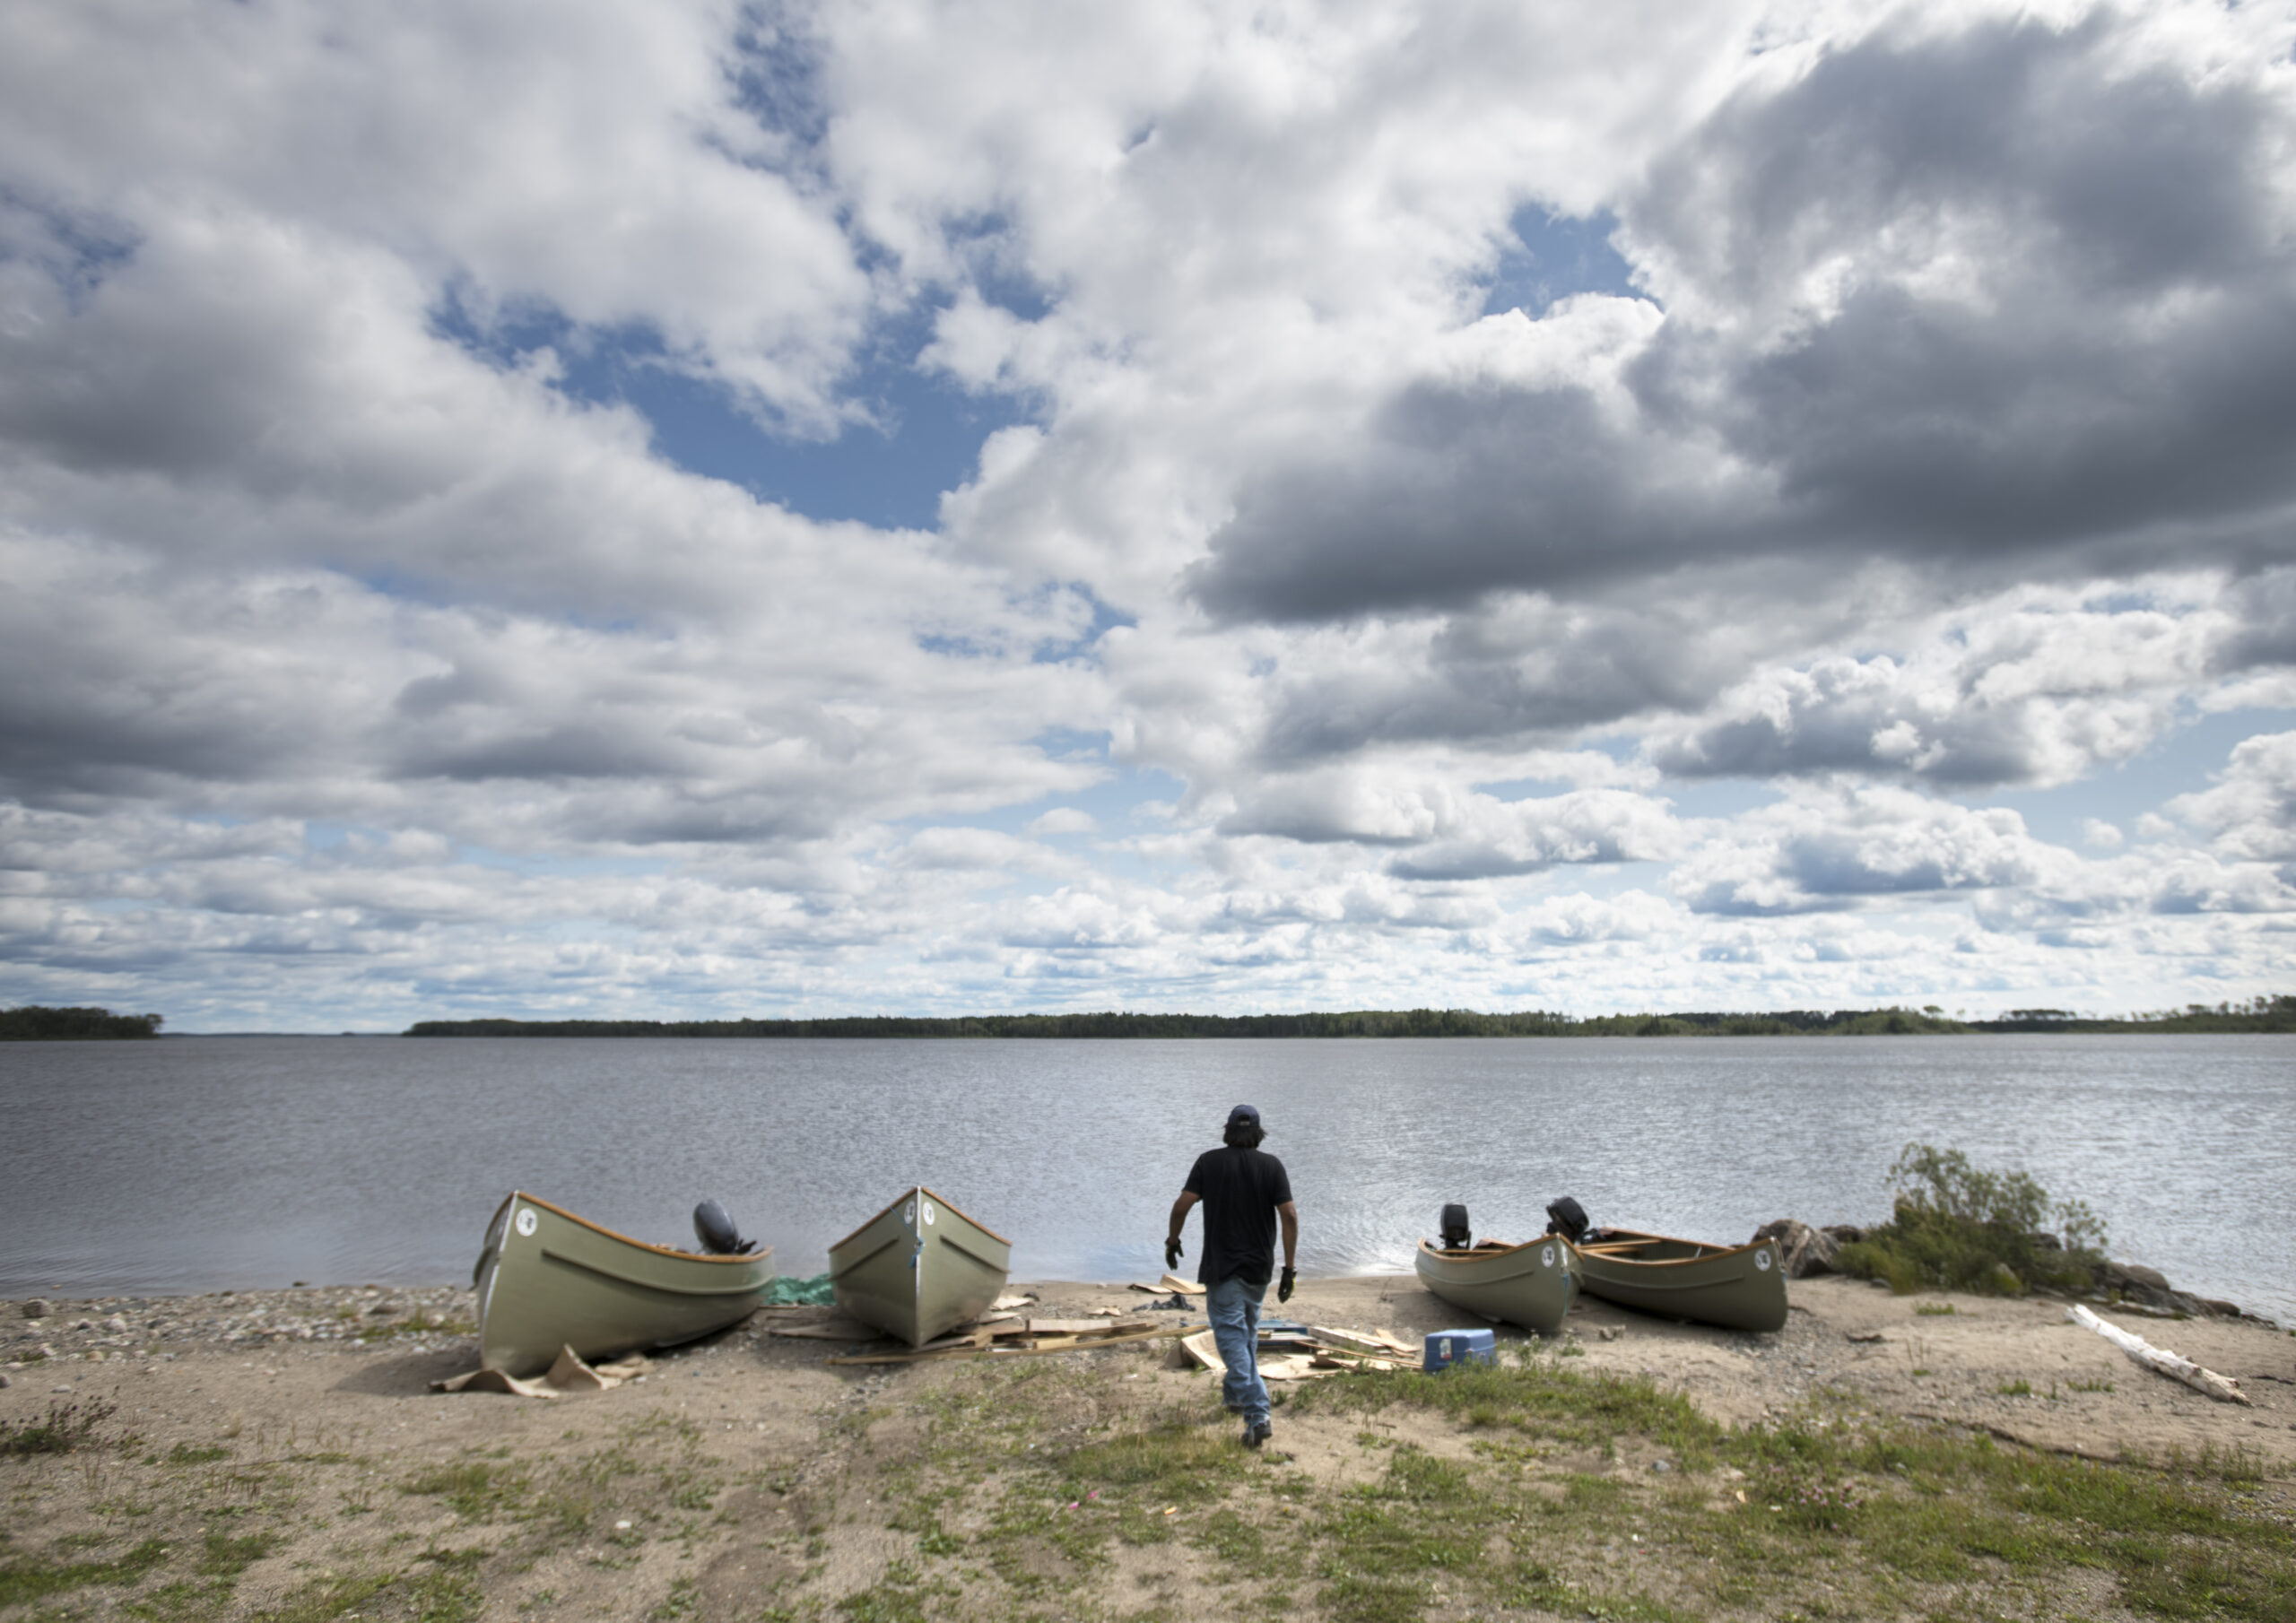 A man walks towards four canoes on the shore of a large lake on a cloudy day